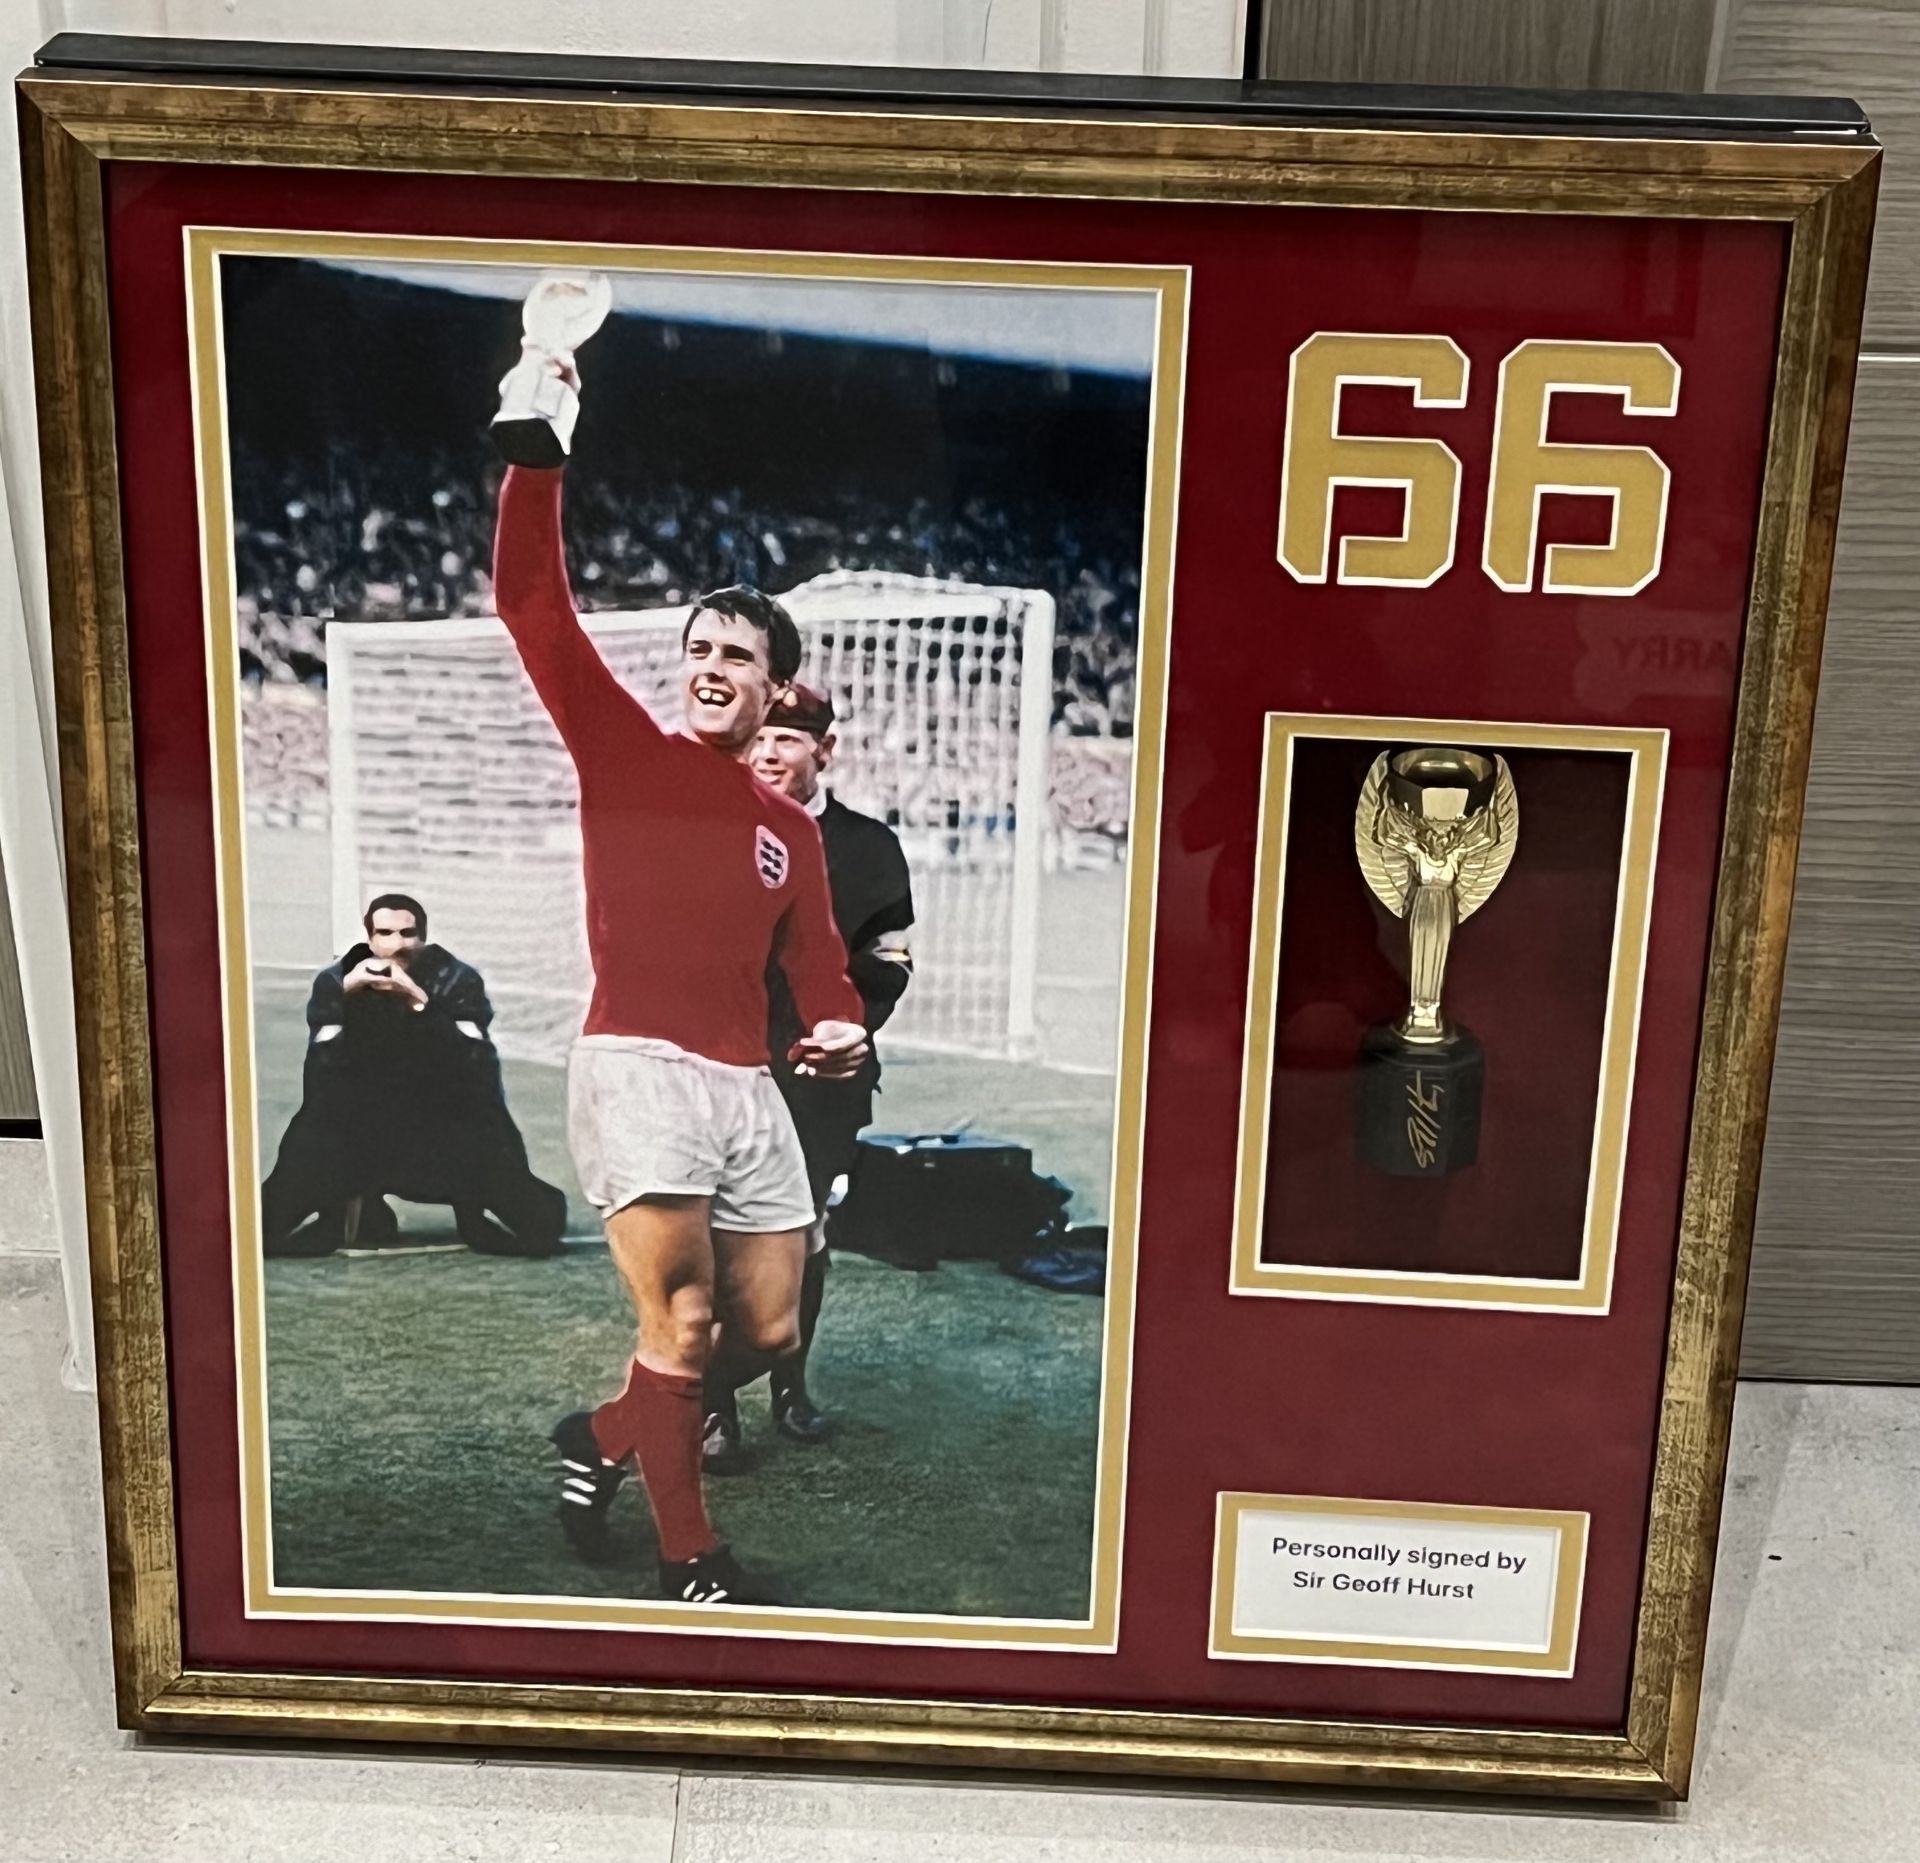 Hand signed presentation of Sir Geoff Hurst featuring a mounted hand signed minature 1966 World